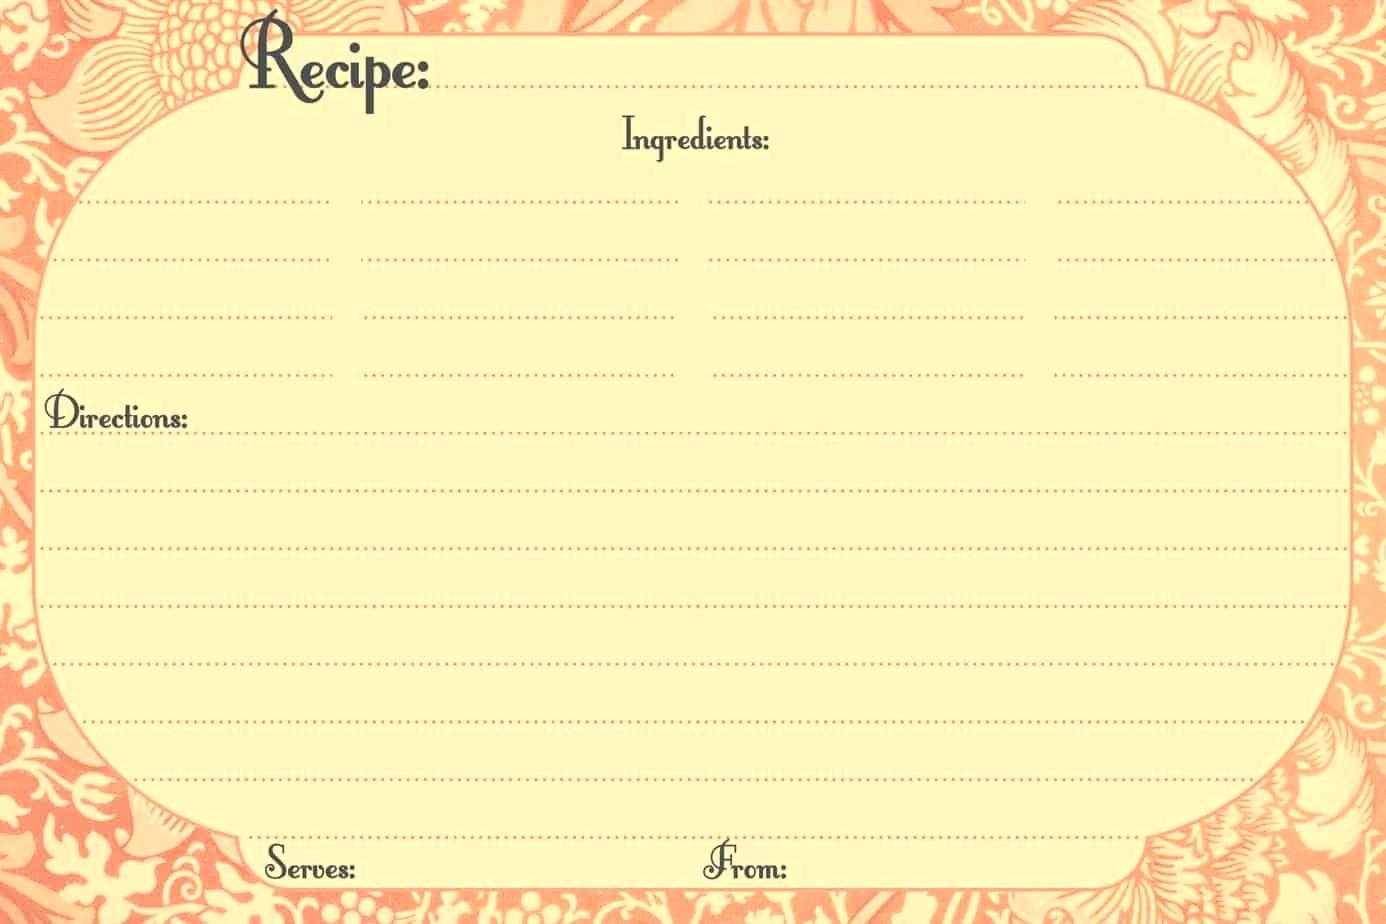 Recipe Card Template Microsoft Word – Bestawnings With Regard To Free Recipe Card Templates For Microsoft Word